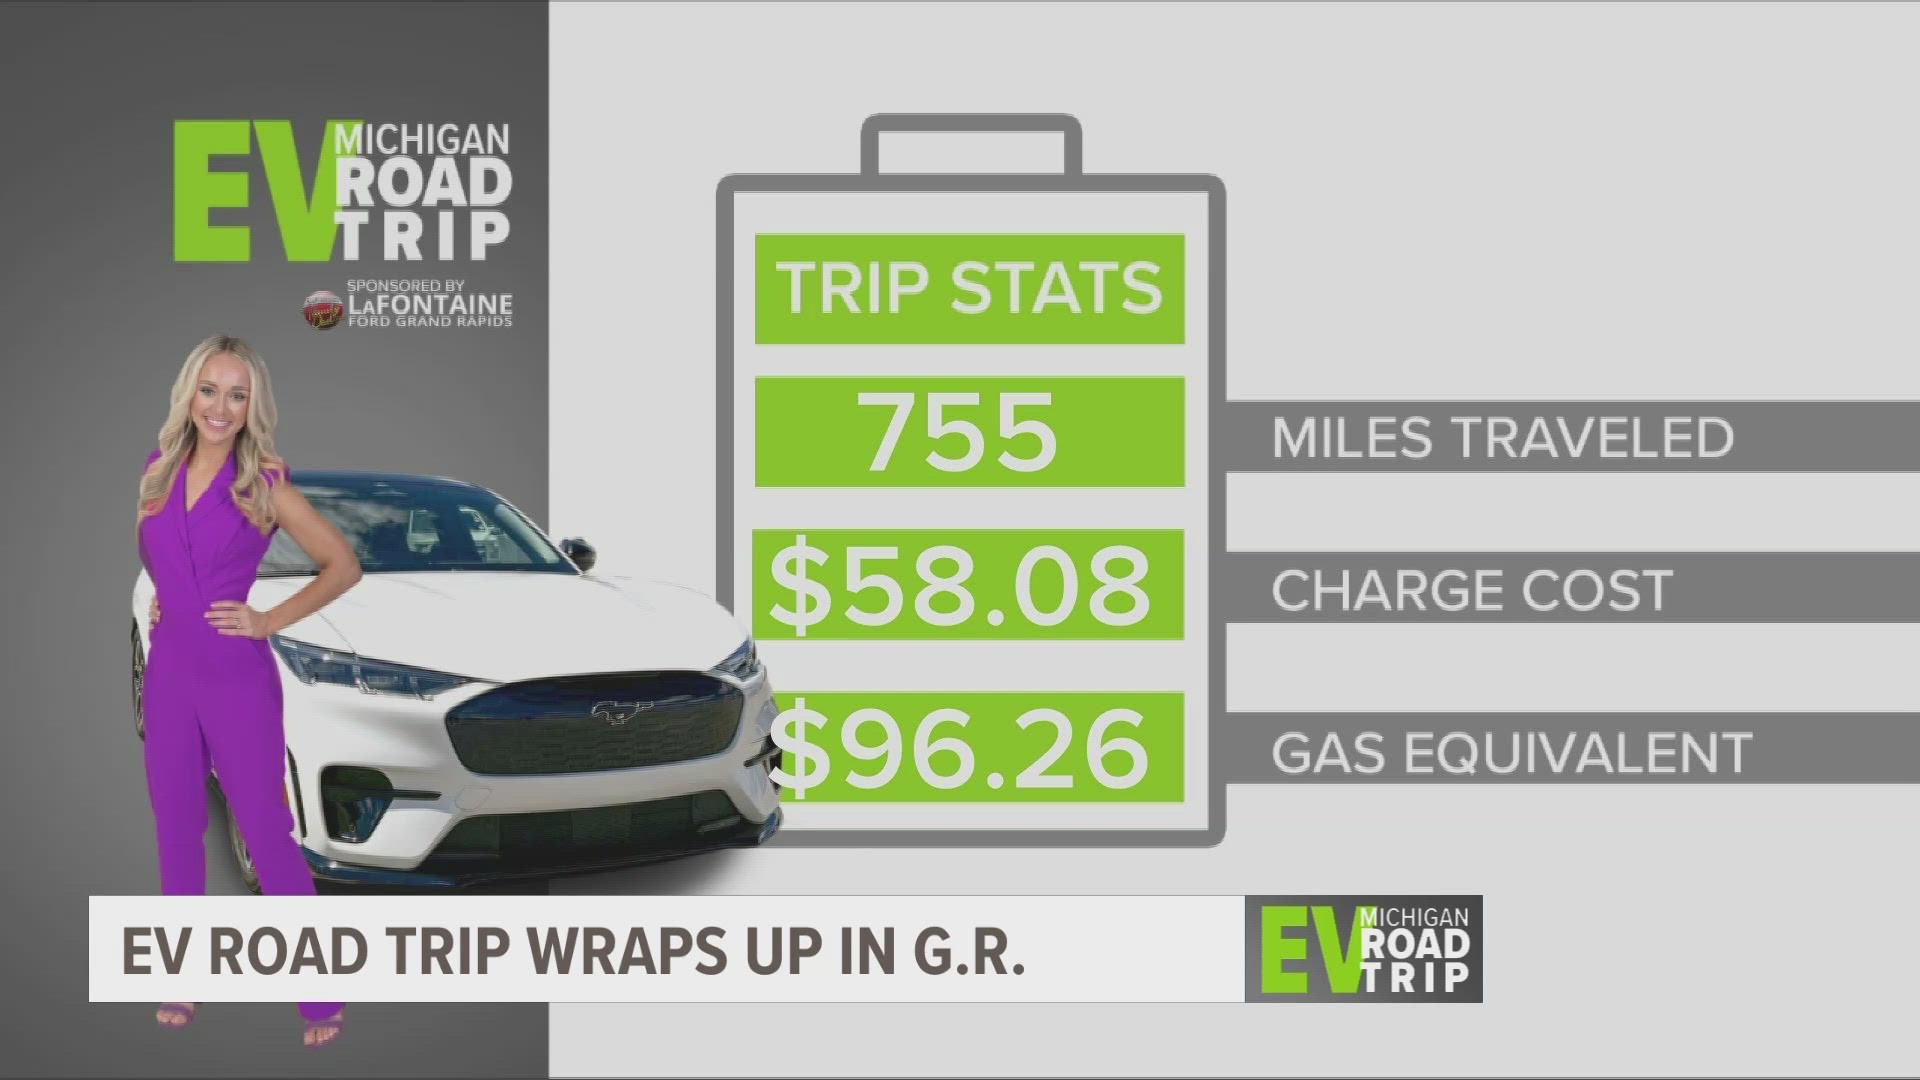 Samantha Jacques breaks down how far she traveled during her road trip, and the costs compared to an internal combustion vehicle.